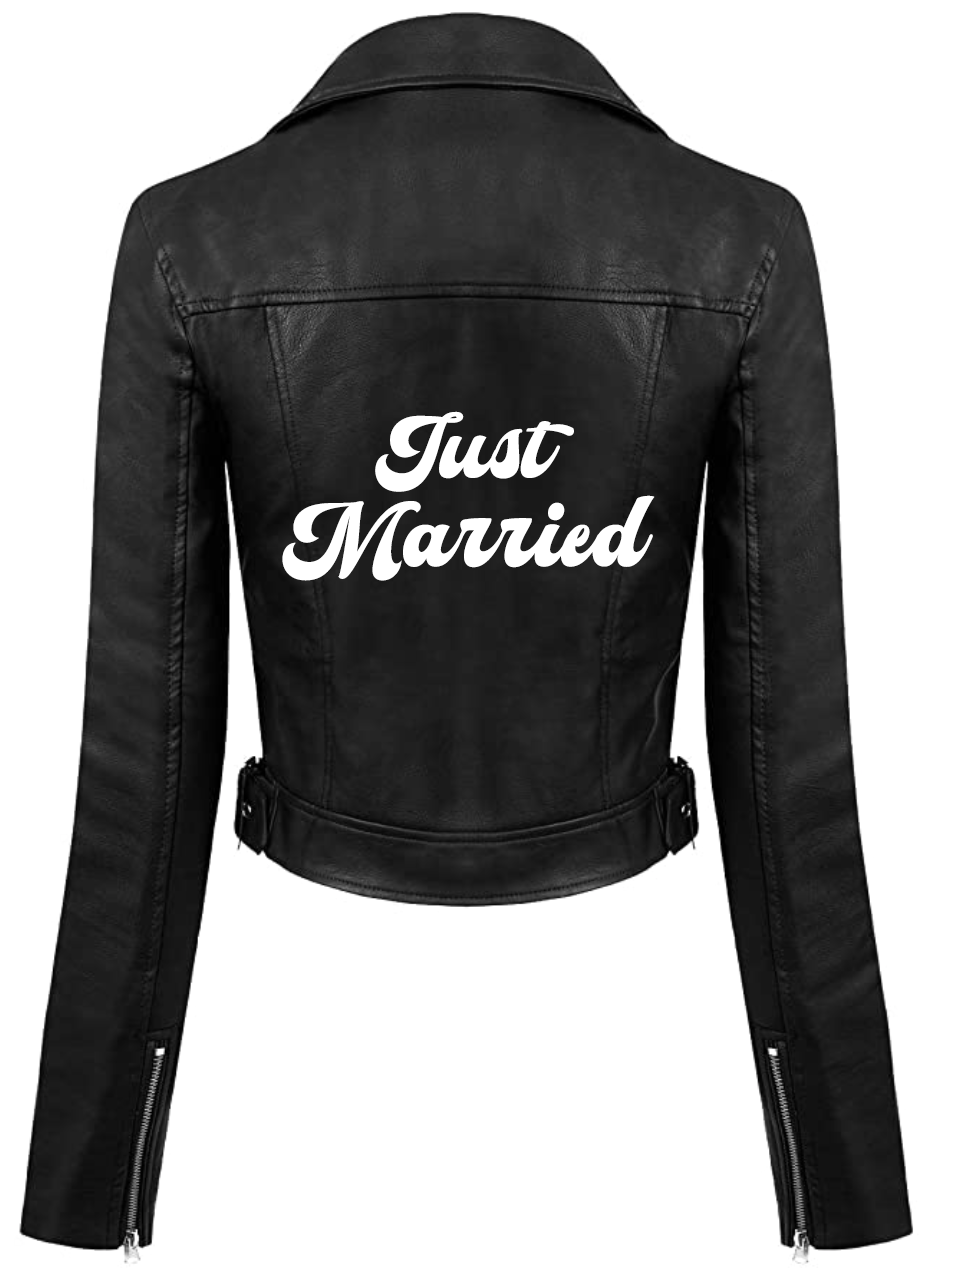 Just Married Faux Black Leather Jacket